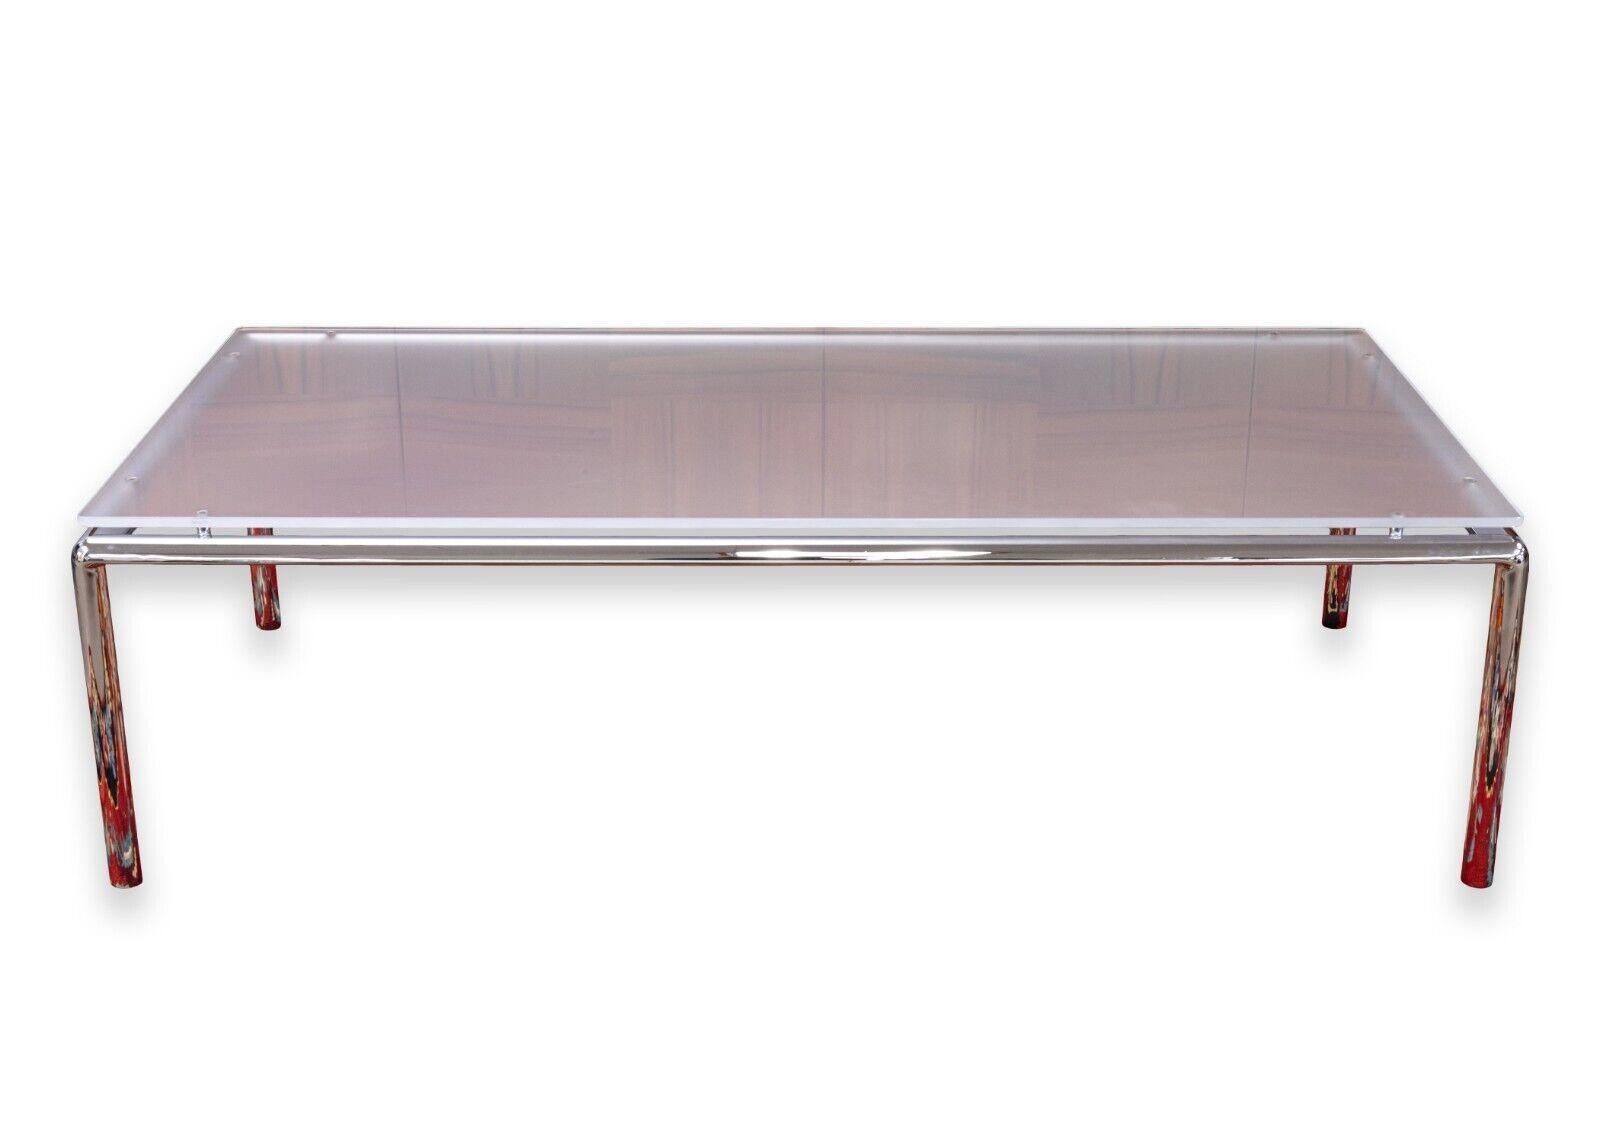 A de Sede DS-9075/62 Bauhaus coffee table. This is a wonderful contemporary modern coffee table. This table features a stainless steel base with a chrome finish, and a satin glass top with rounded corners. This is a beautiful table which gives off a